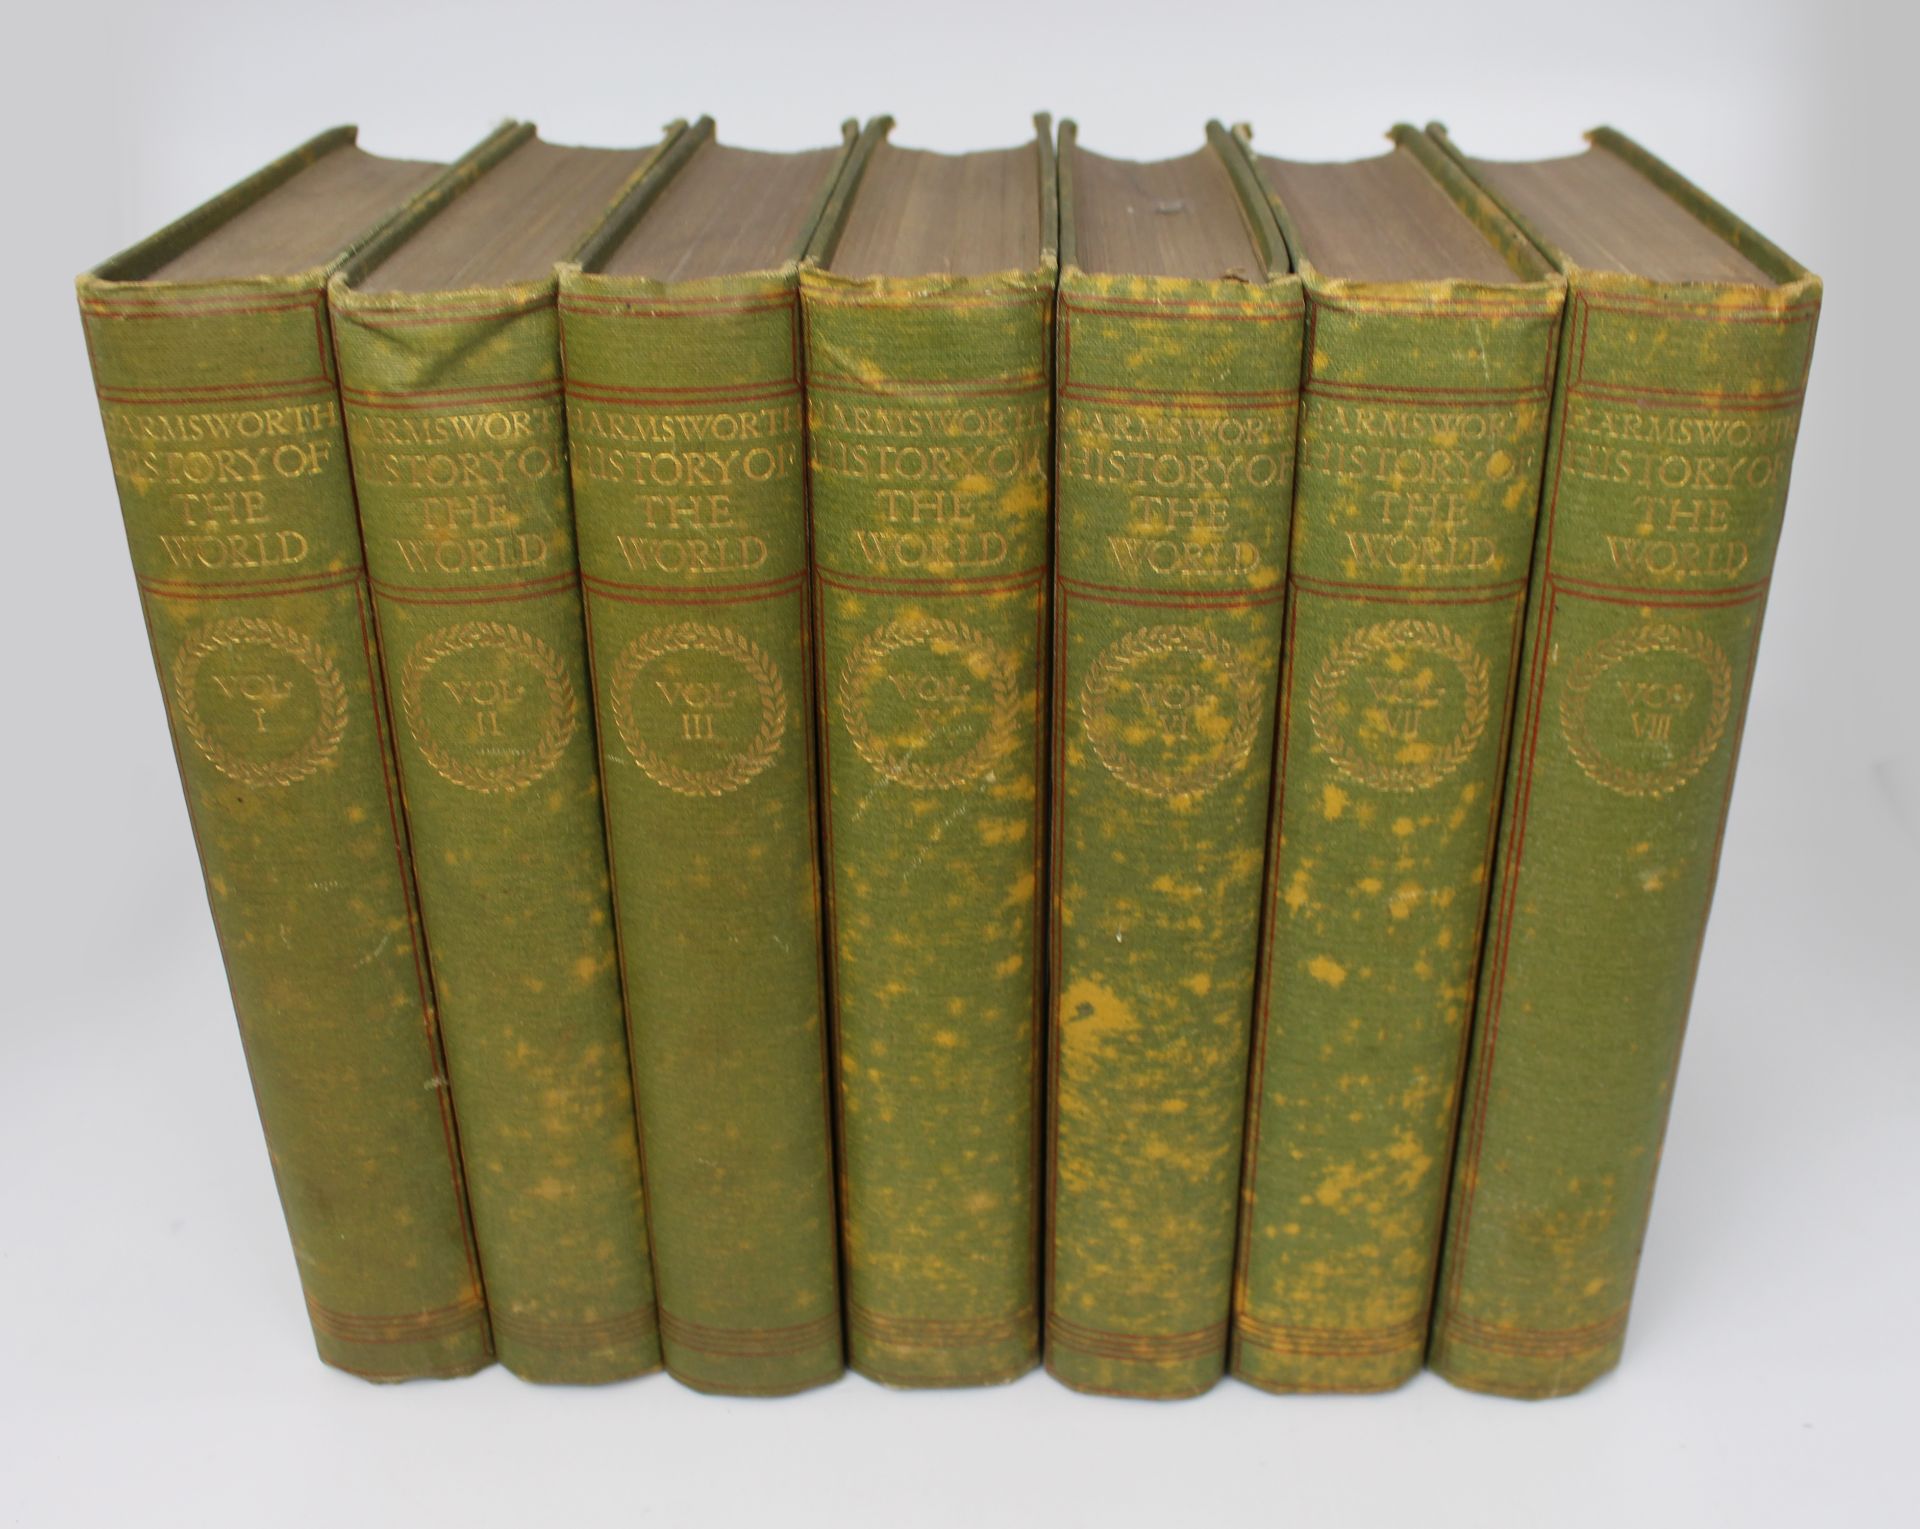 7 Volume Harmsworth History of the World - Image 2 of 7